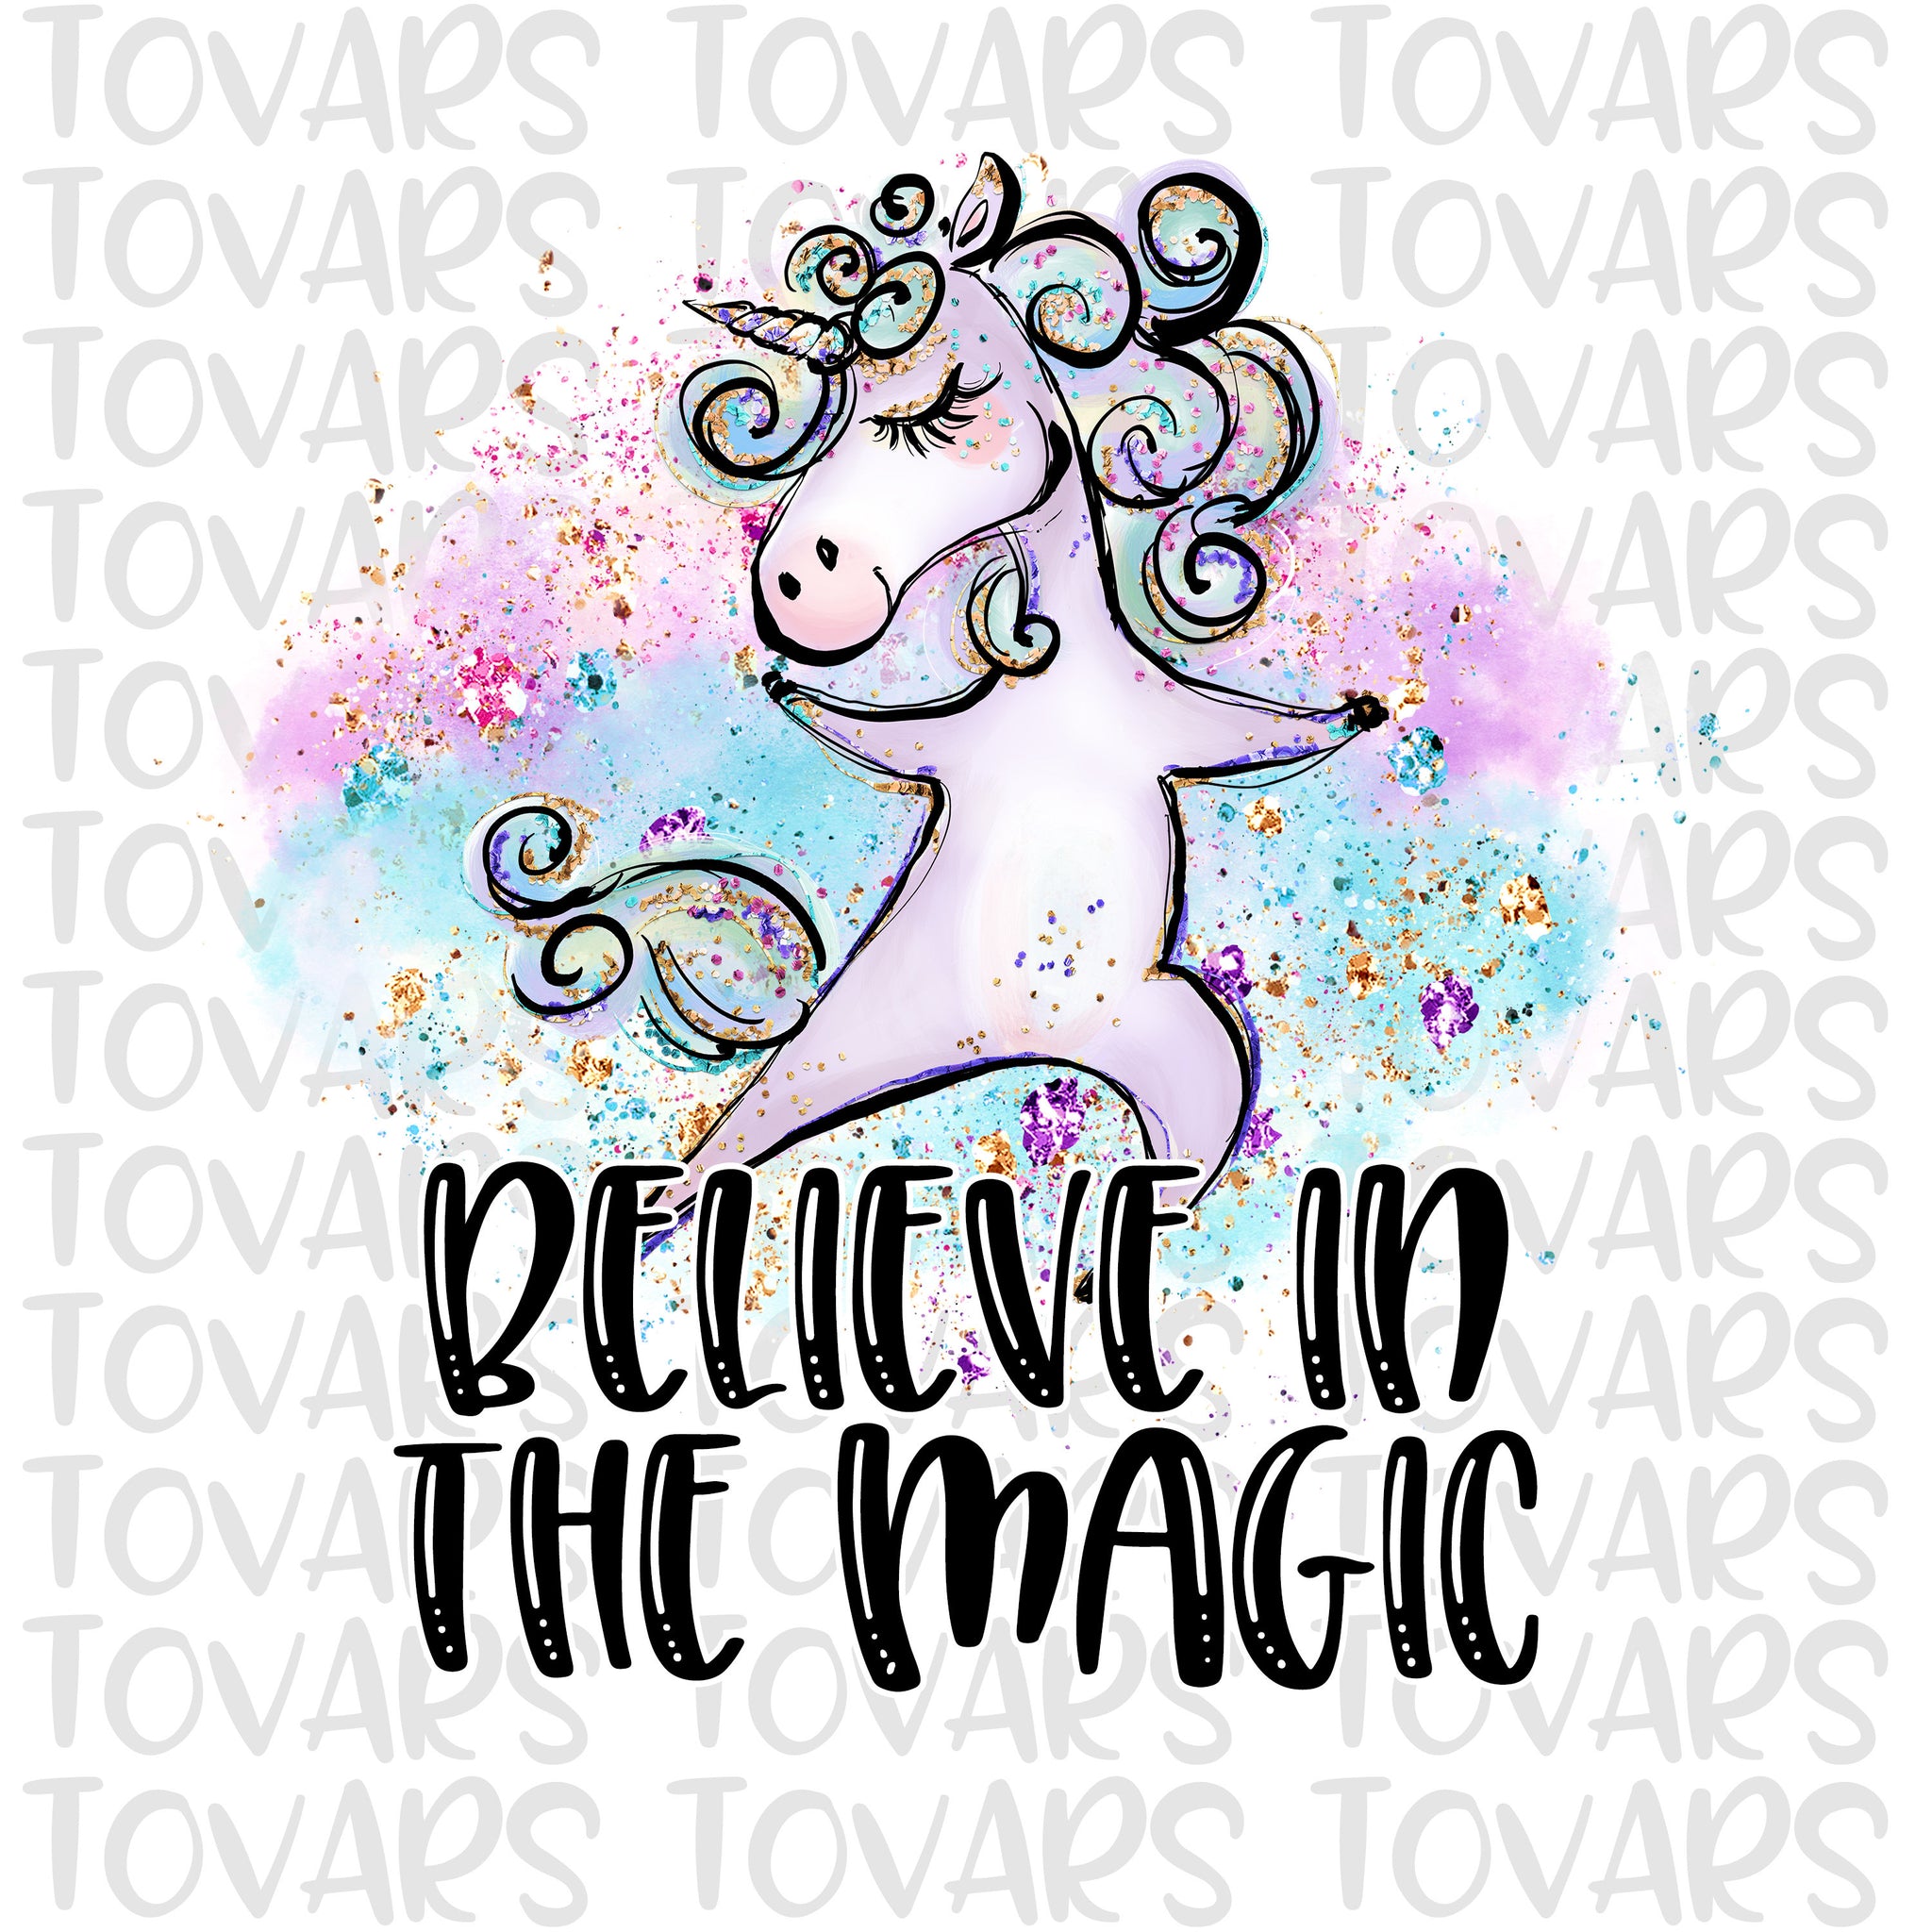 Download Unicorn Sublimation Download Believe In The Magic Unicorn Png Instan Tovars Digital Designs